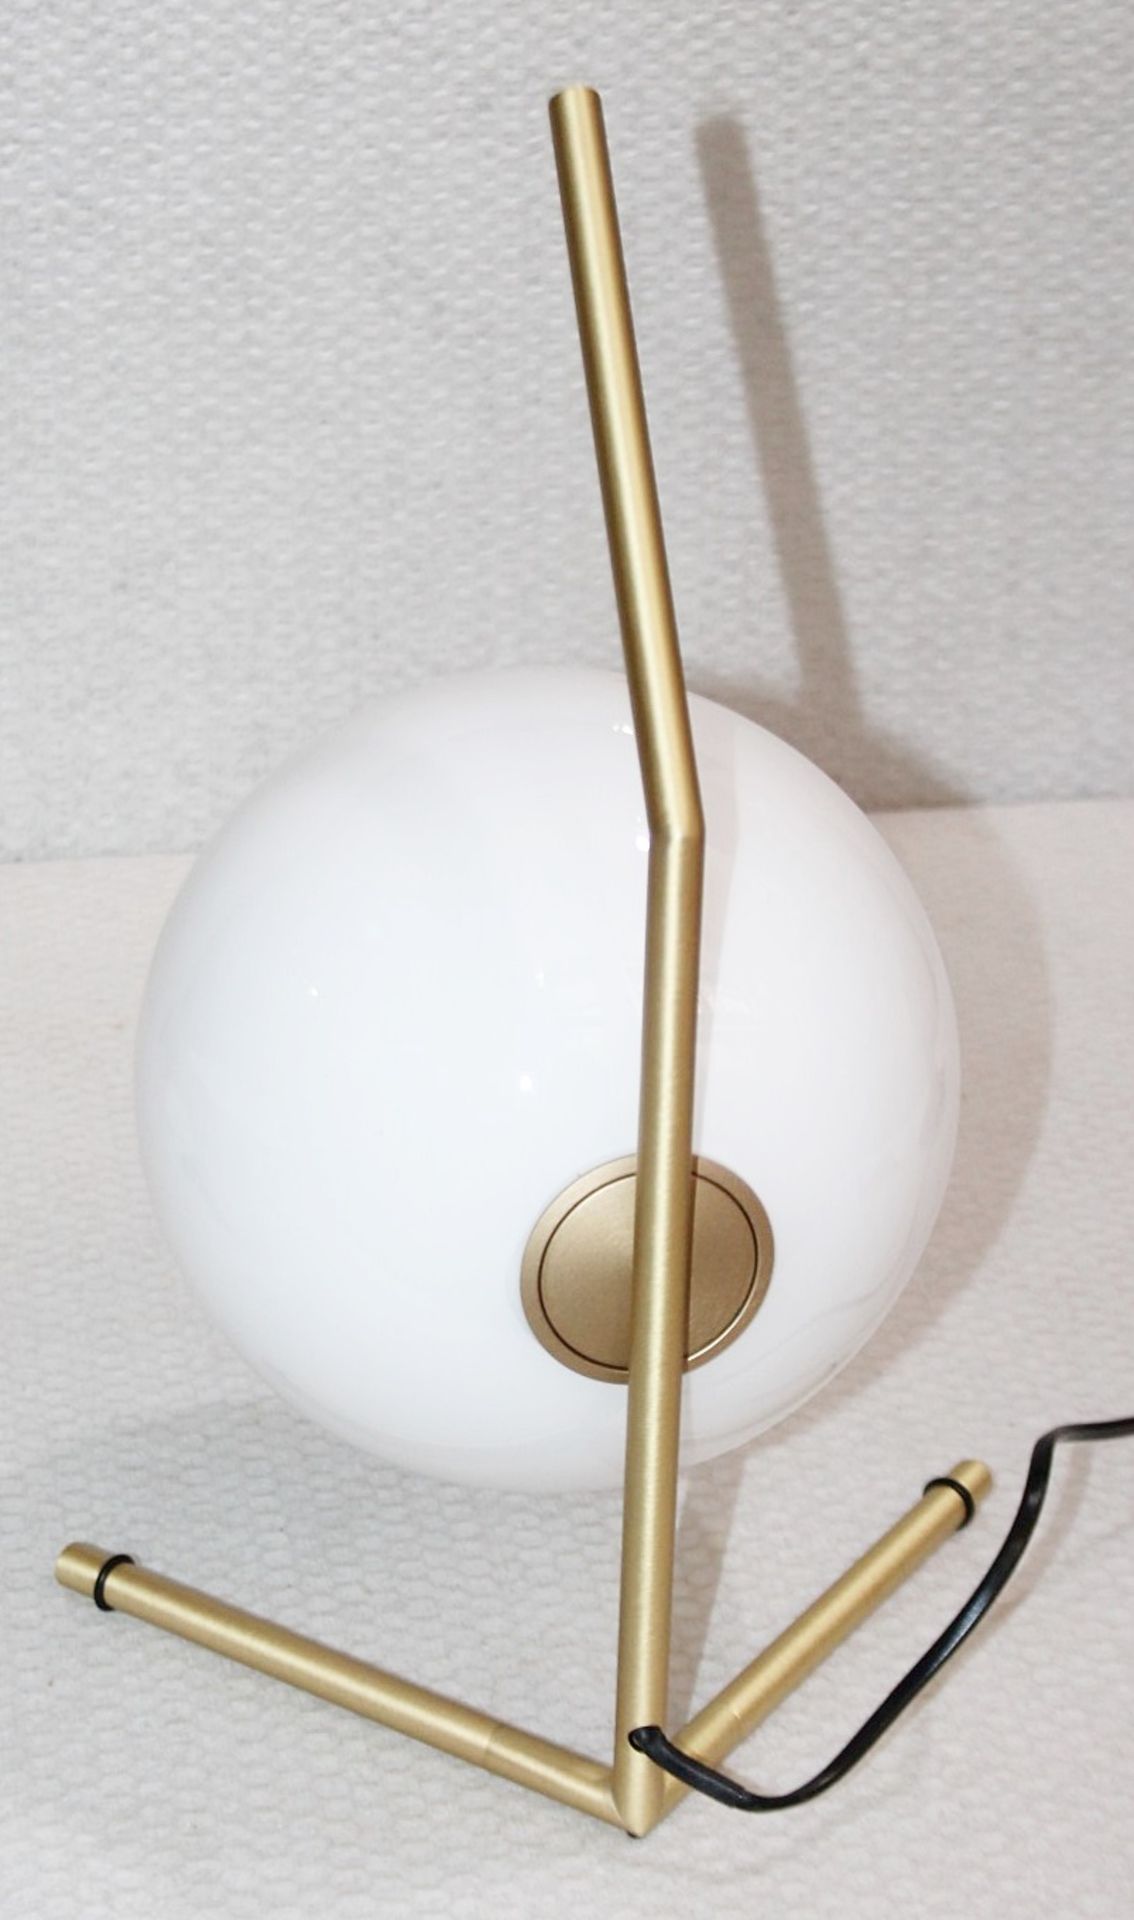 1 x FLOS 'IC T1' Luxury Designer Low Table Lamp With Opal Shade - Original Price £340.00 - Image 5 of 12